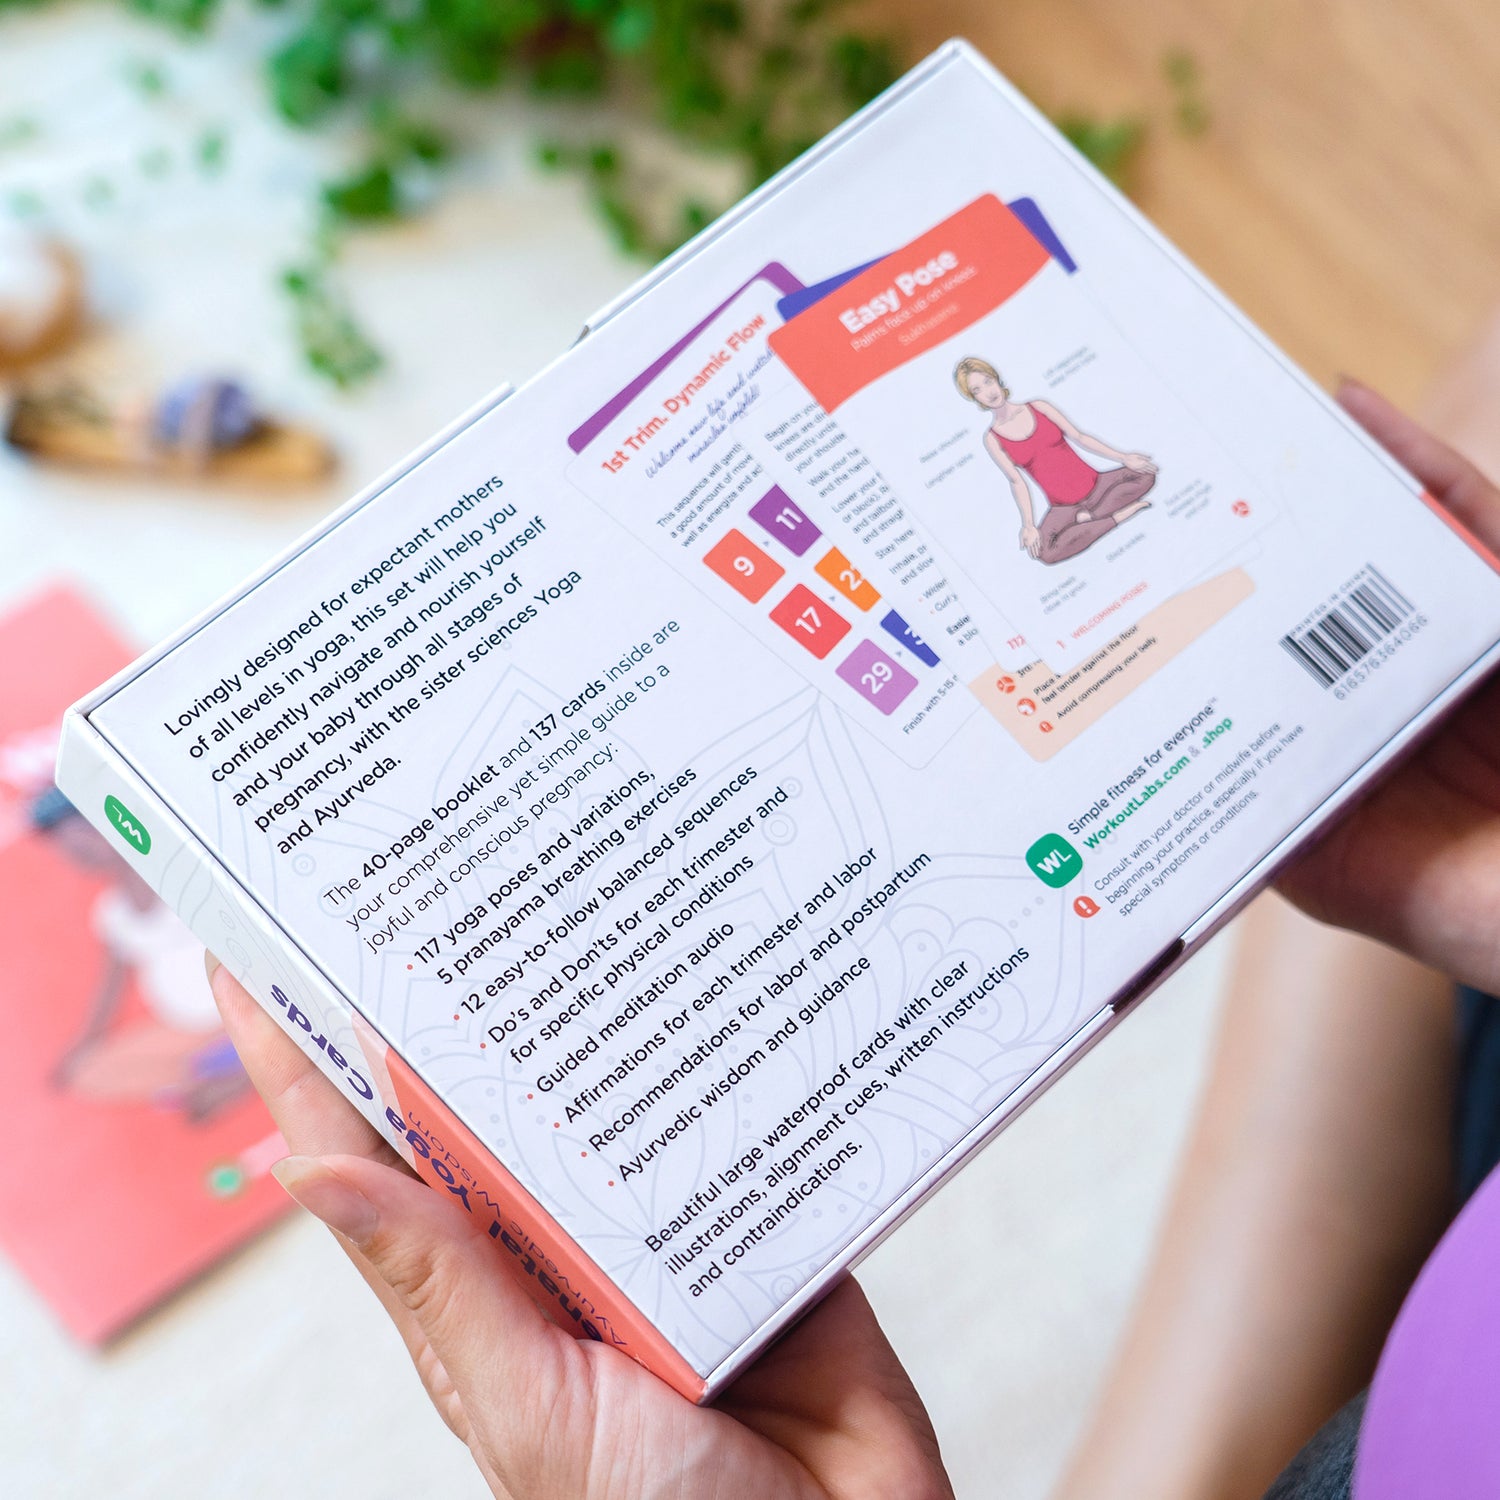 Prenatal Yoga Cards Set for Pregnant Mothers of All levels in yoga